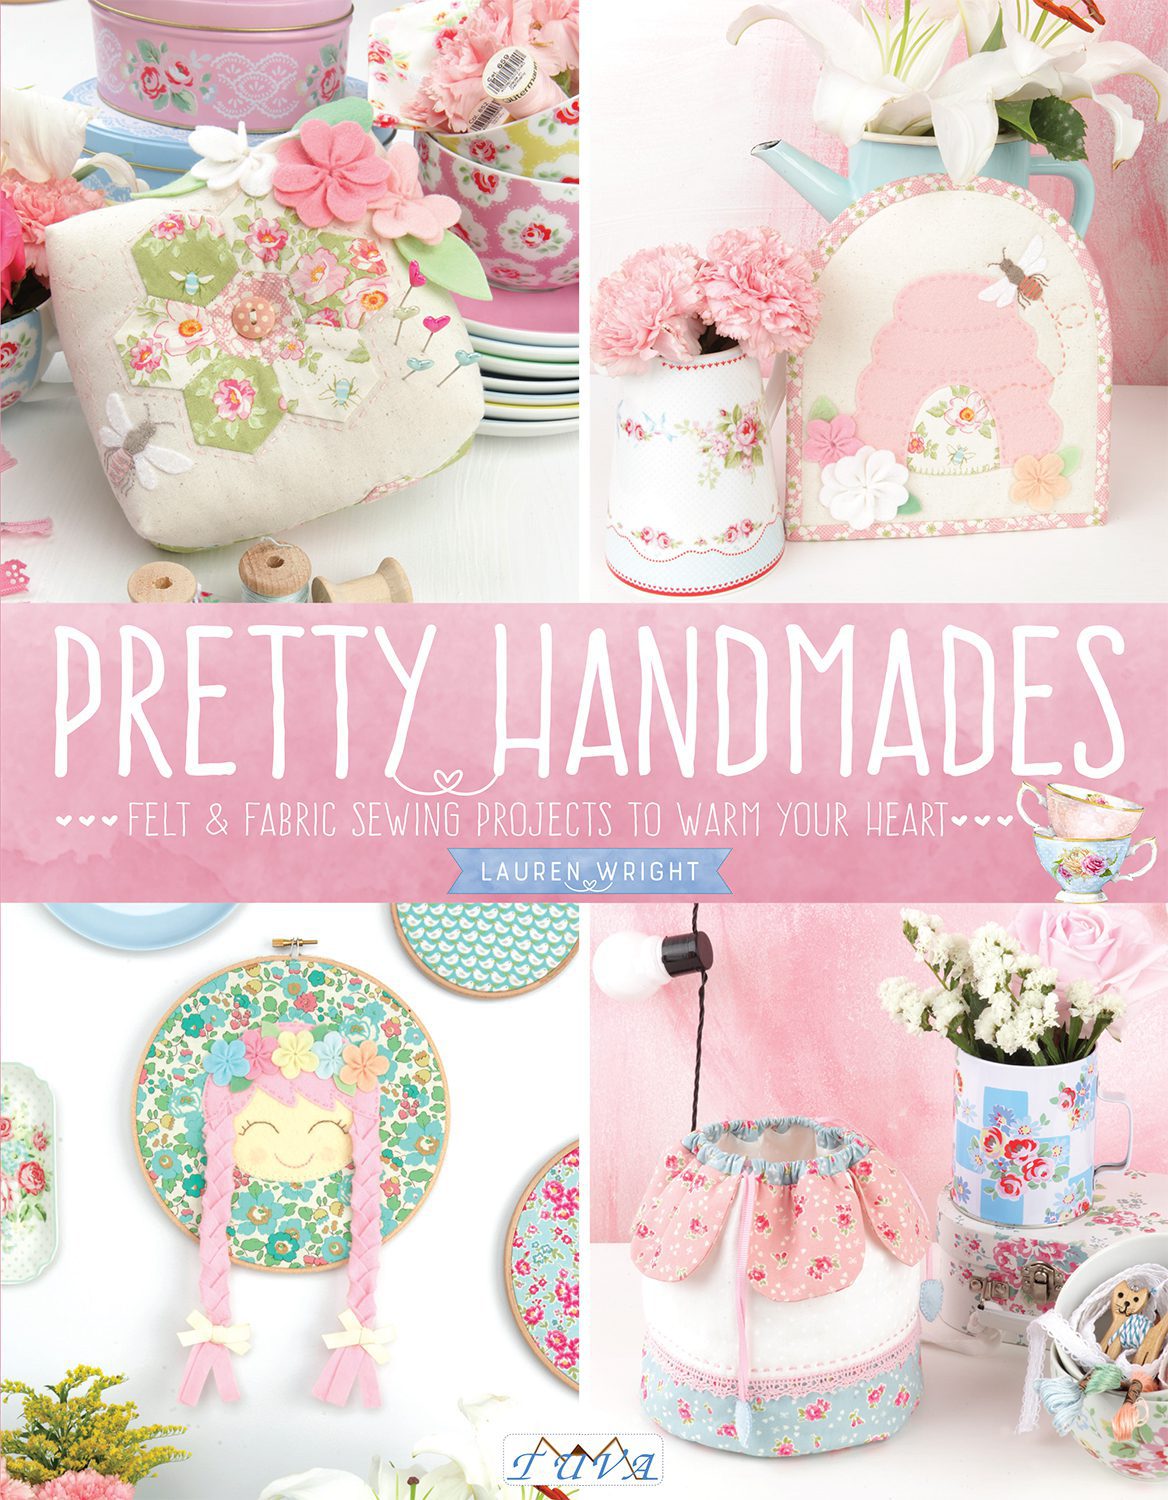 My first book is coming; ‘Pretty Handmades’